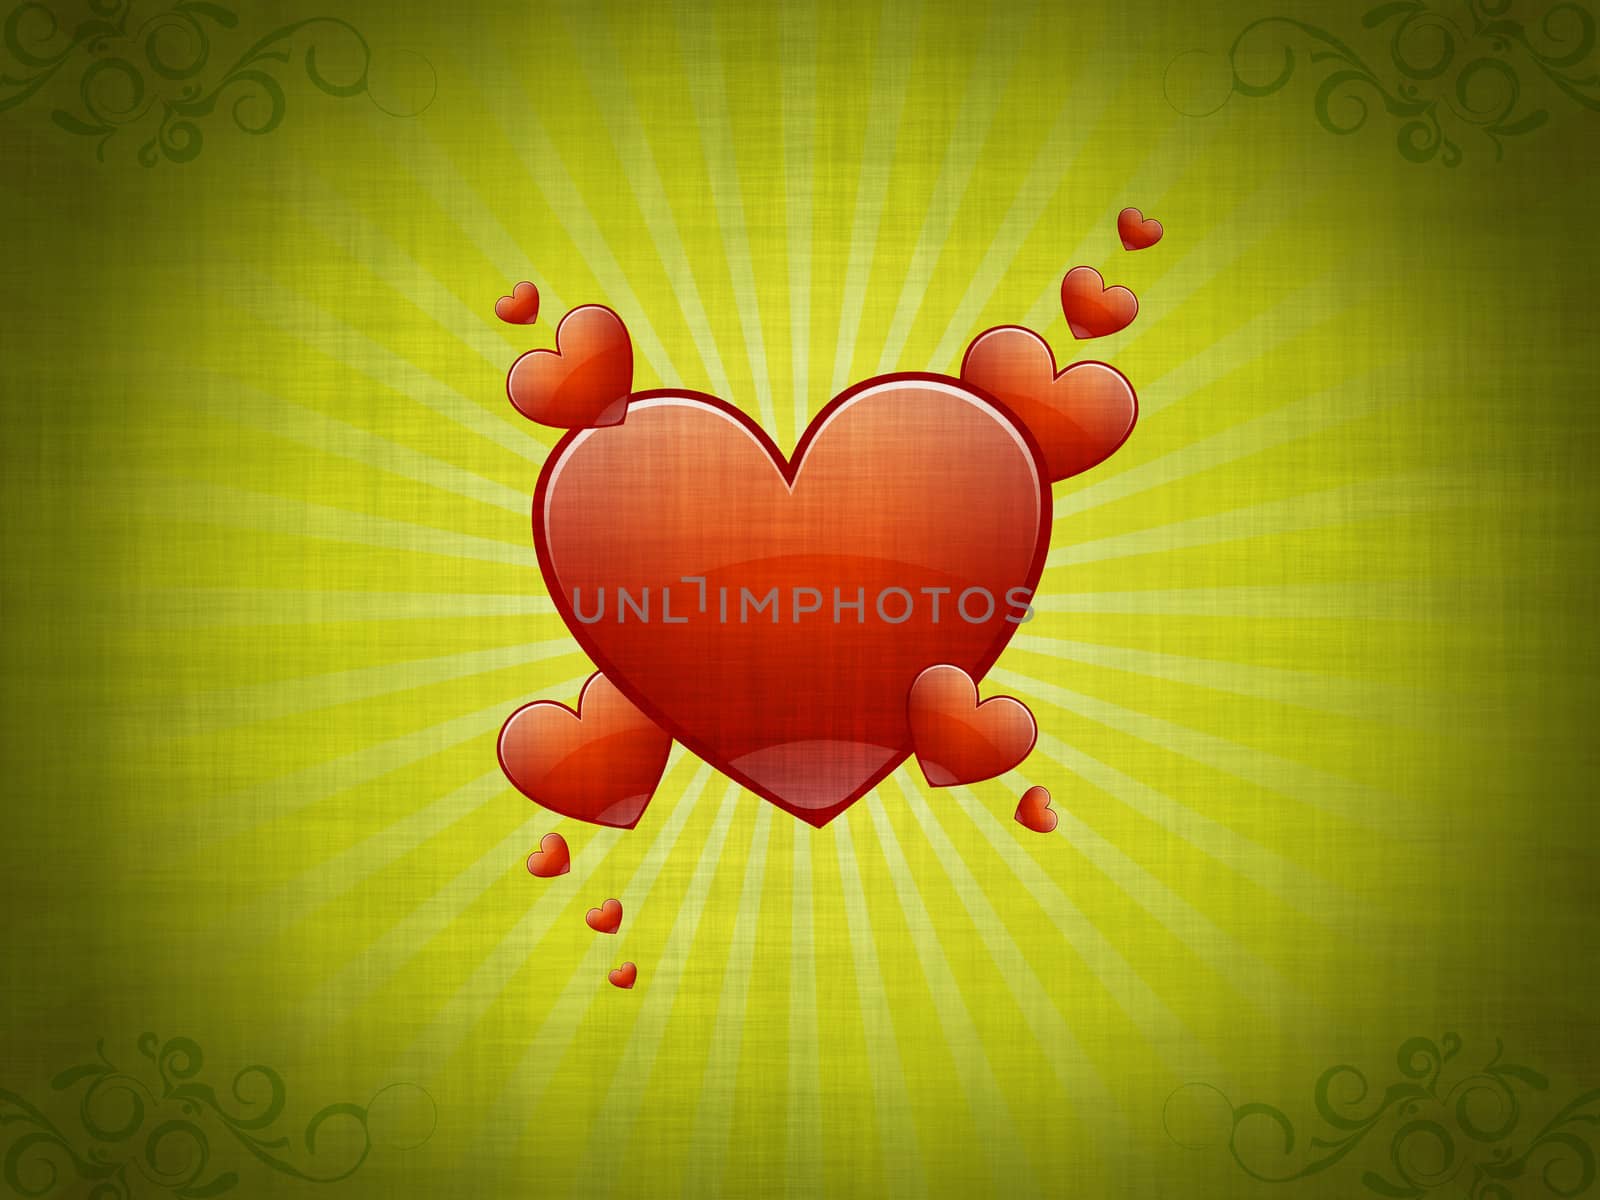 Grungy background with floral elements and red hearts